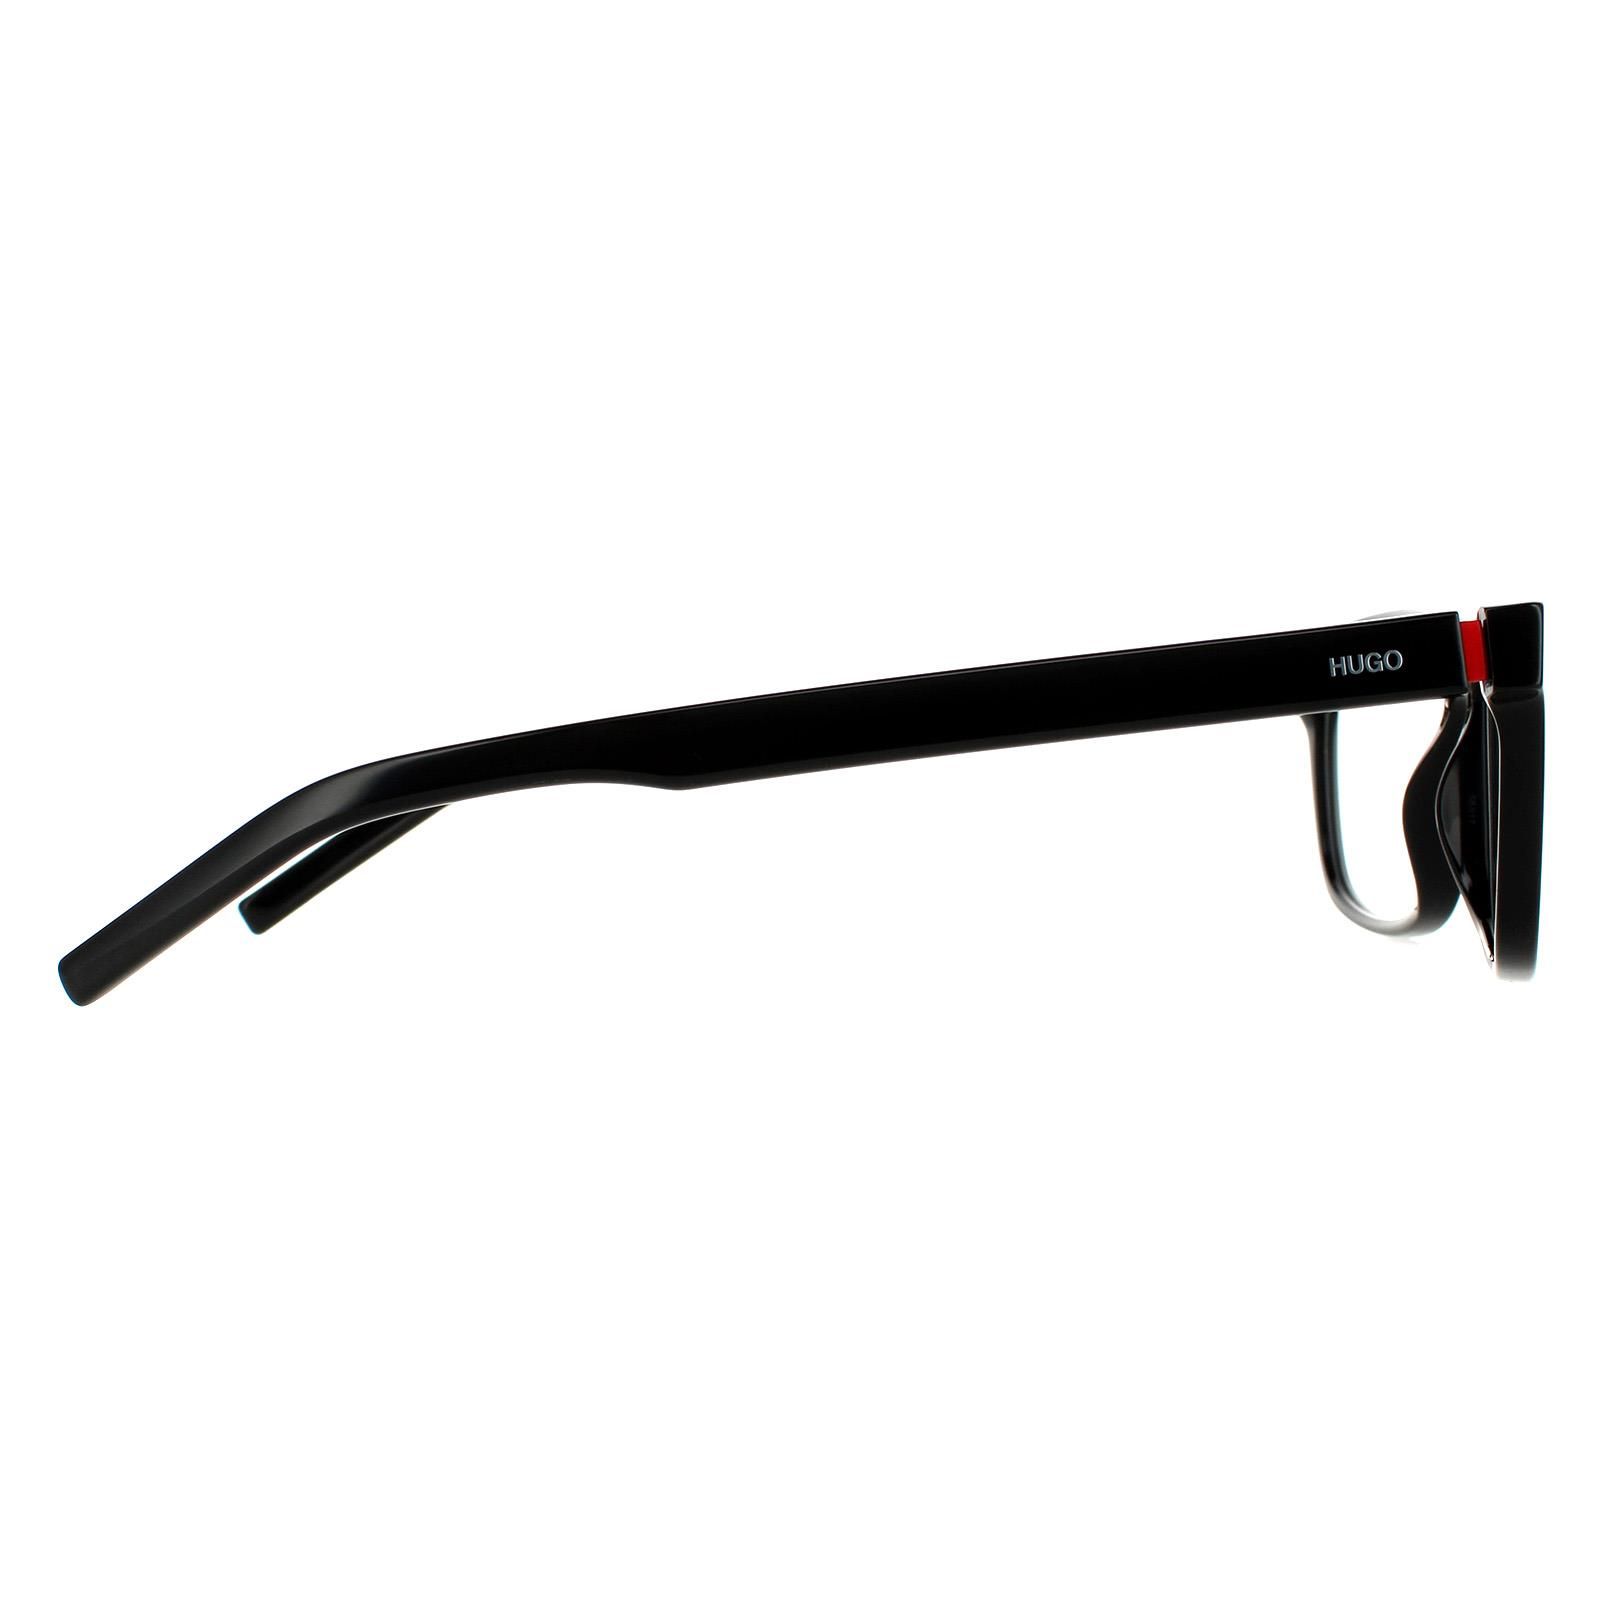 Hugo by Hugo Boss Rectangular Mens Black Red Glasses Frames HG 1115 are a classic square shape crafted from lightweight acetate. The Hugo Boss logo features along the temple for brand authenticity.